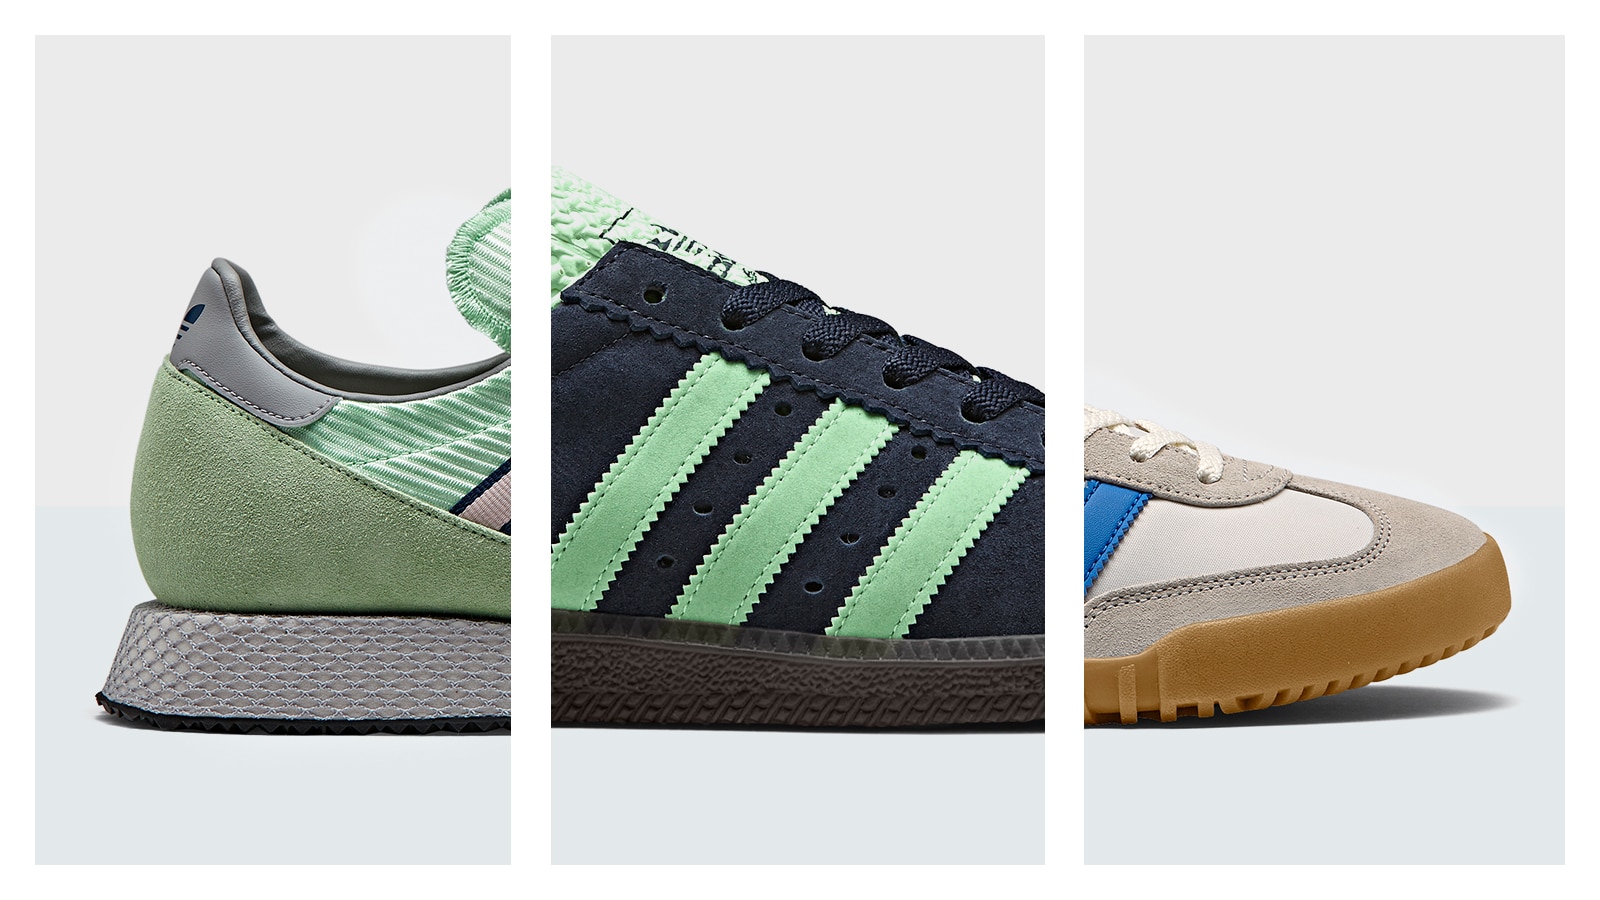 Introducing: The New Adidas Spezial Collection | The Journal | MR PORTER